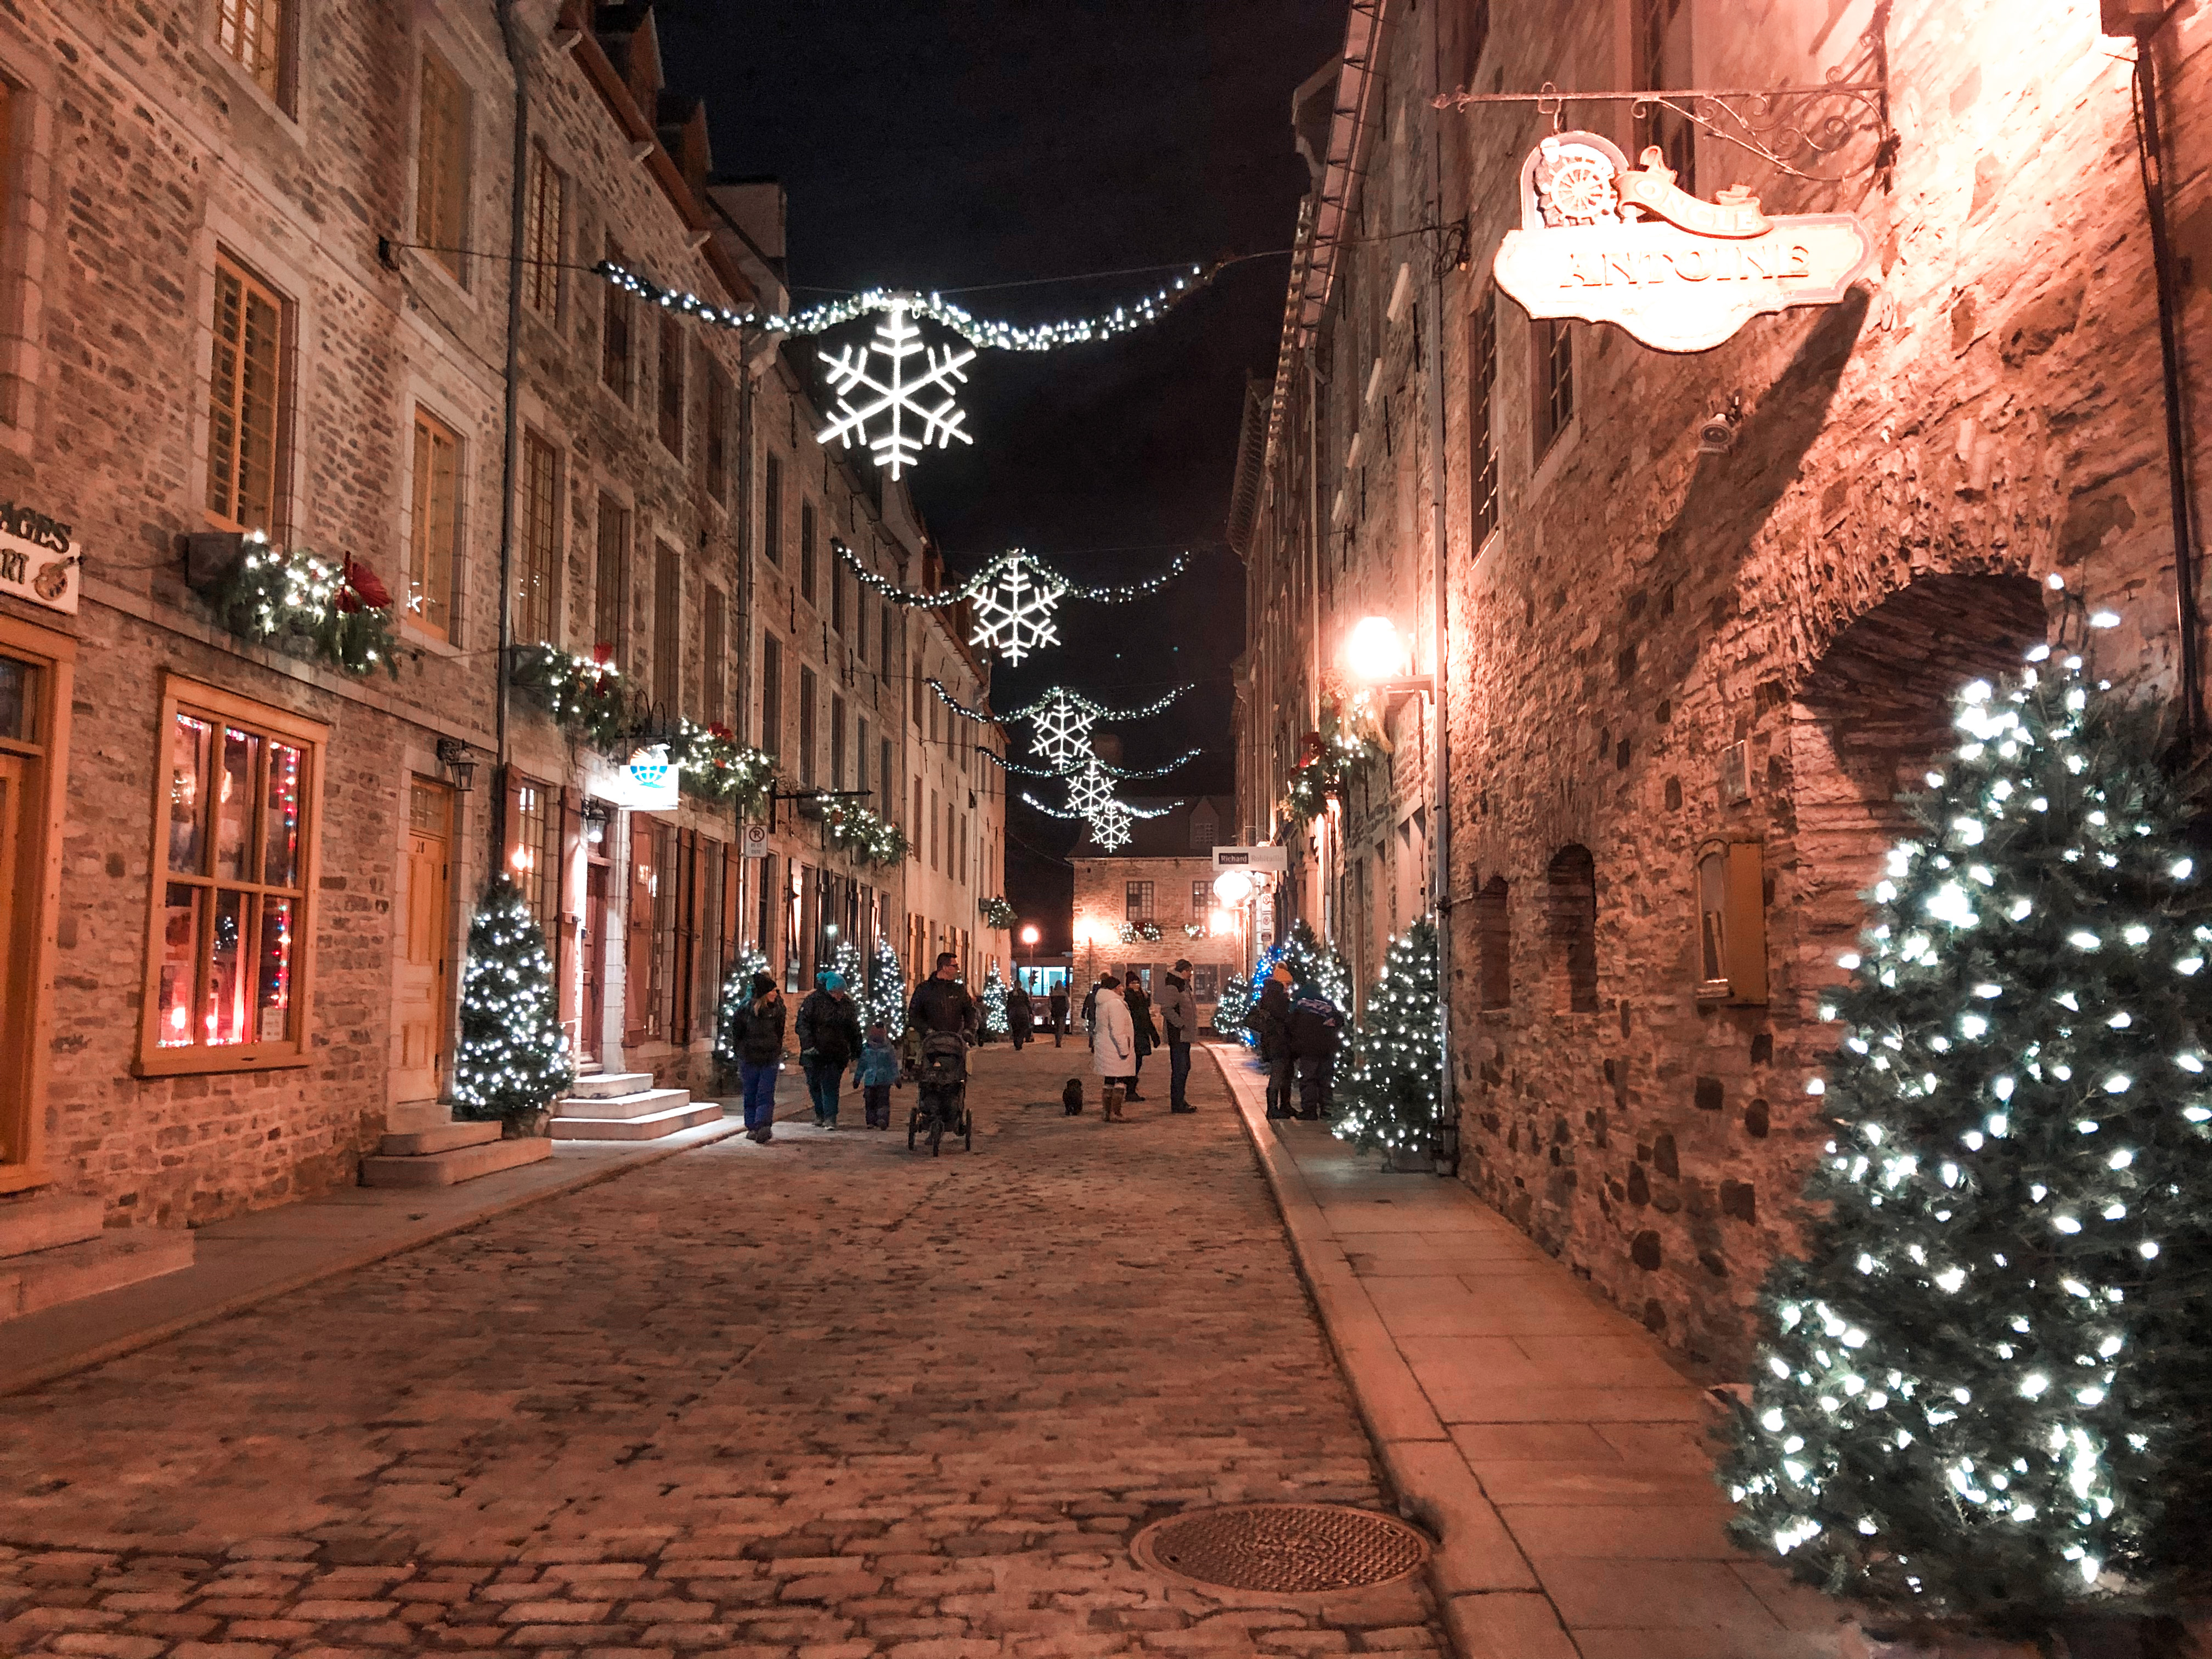 8 useful tips to visit Quebec City